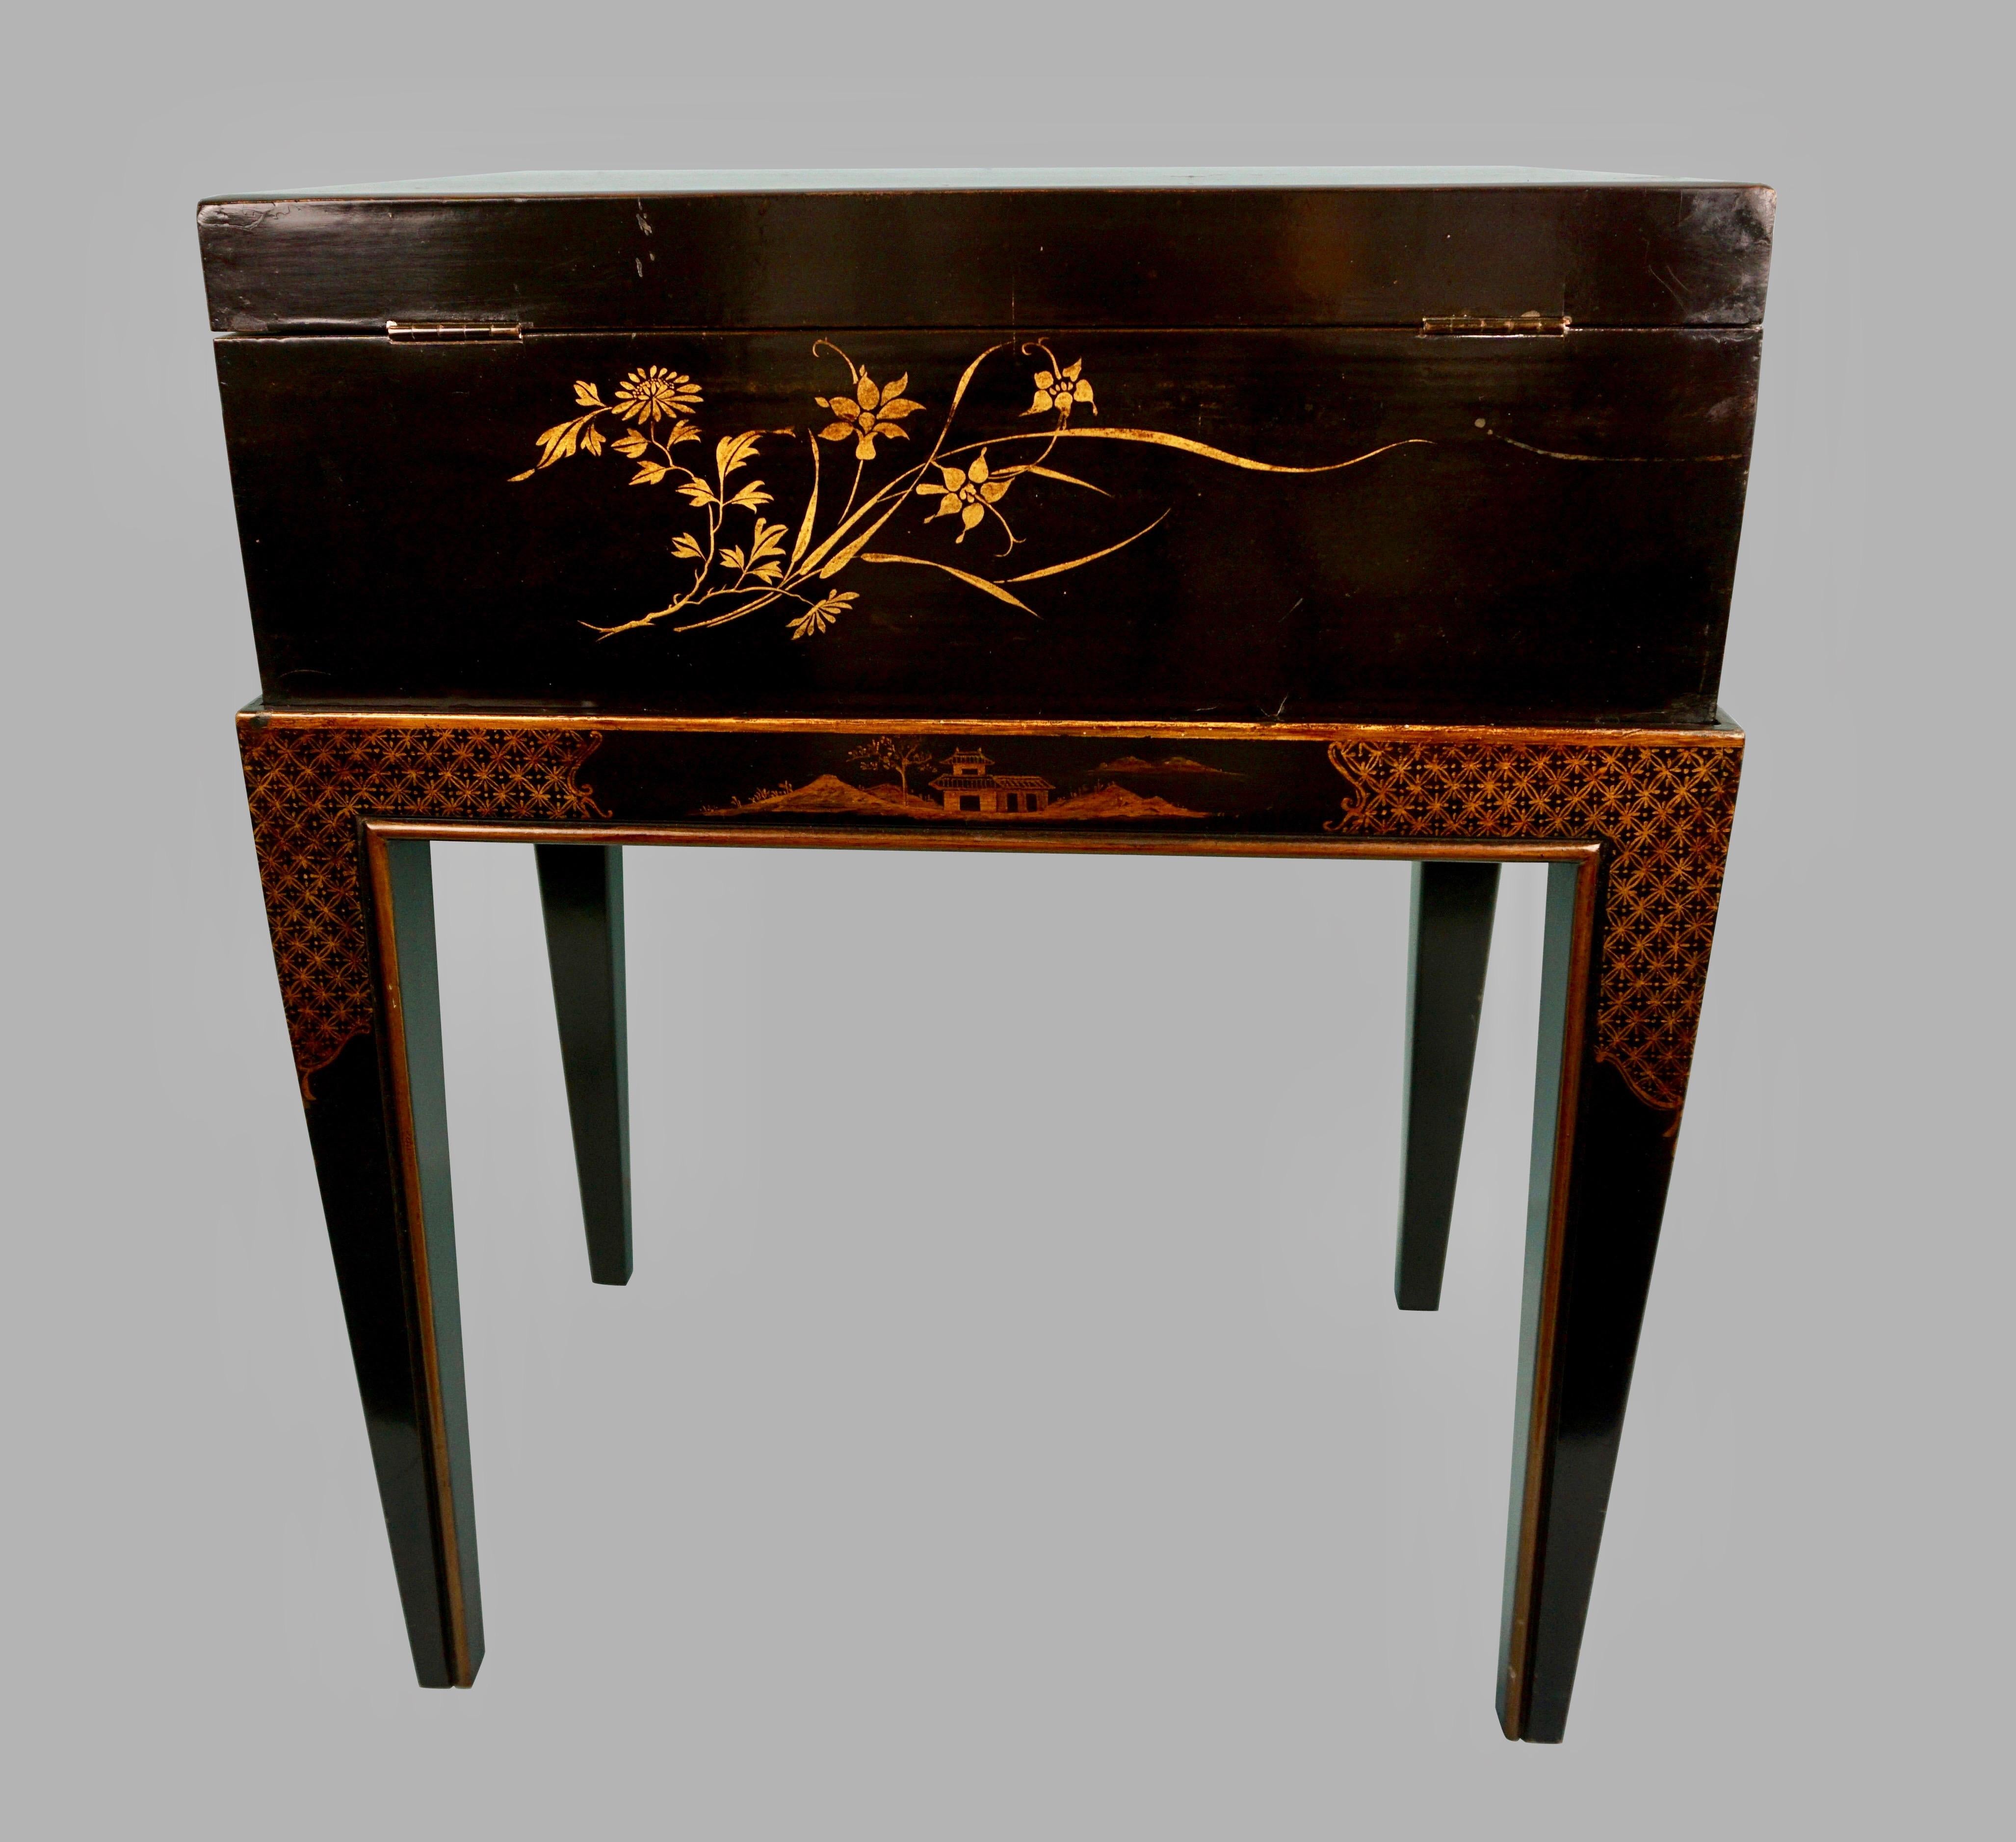 19th Century Chinese Export Black Lacquer Writing or Work Box on Later Custom Stand